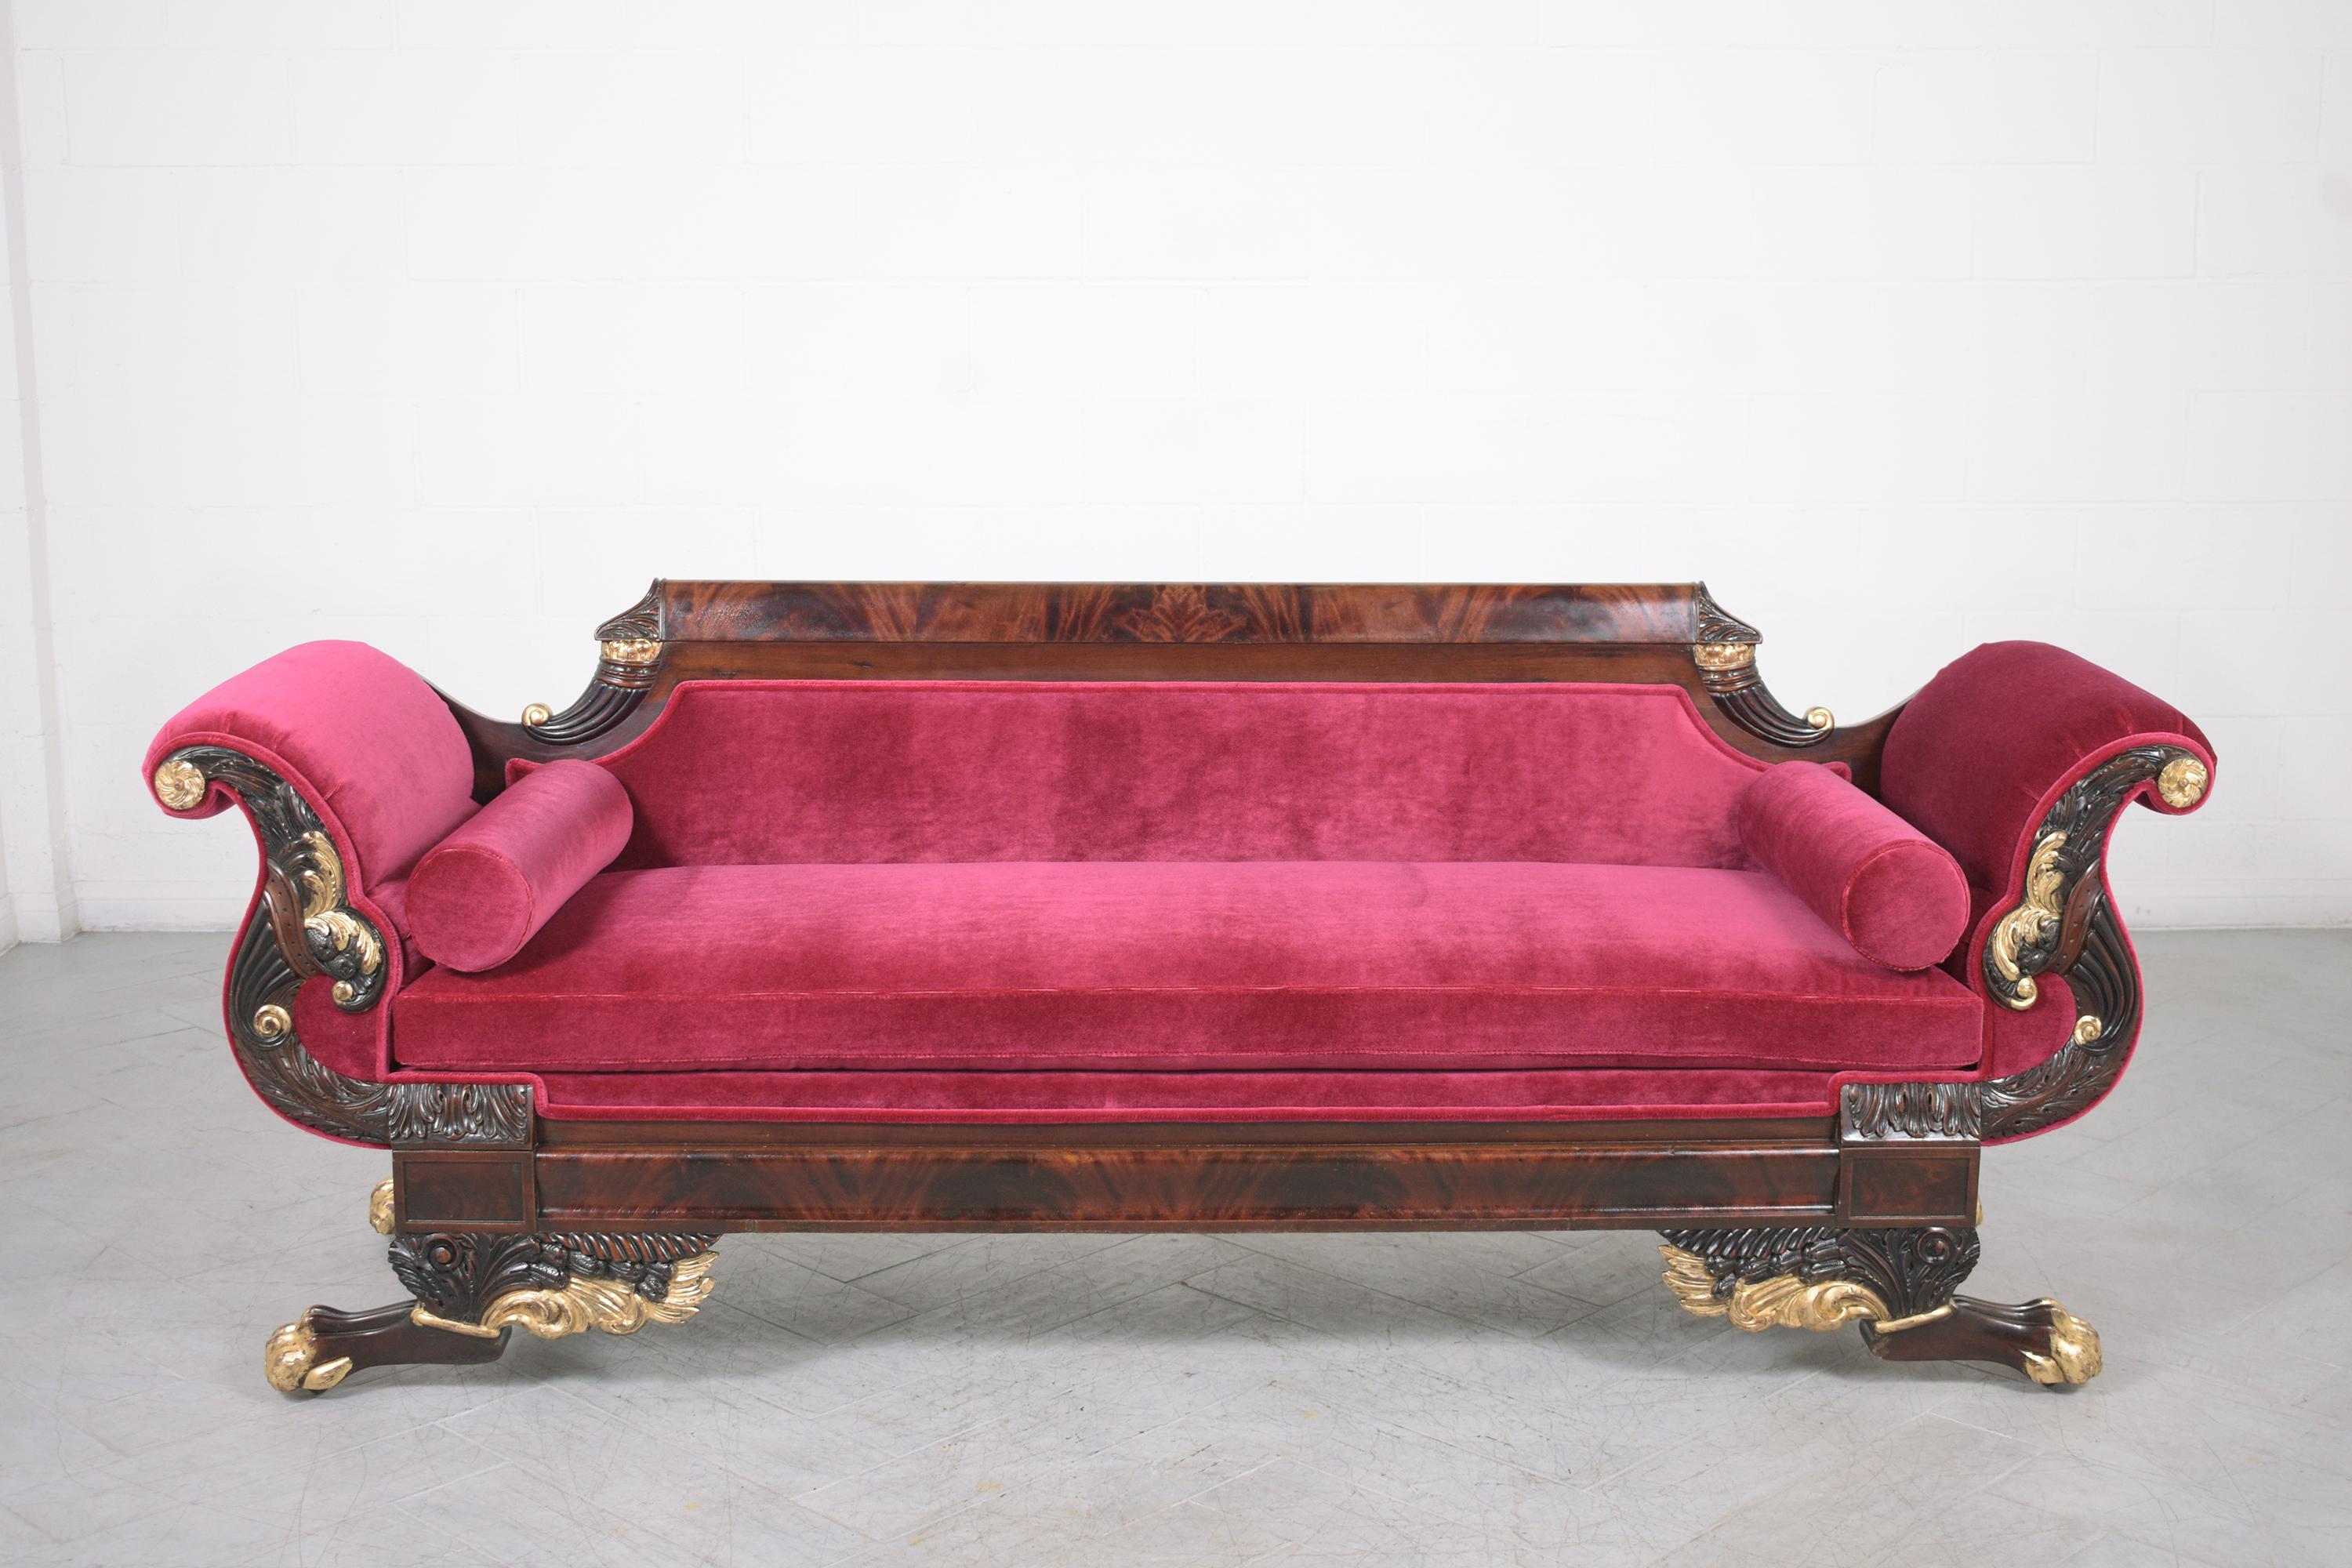 An extraordinary antique empire sofa handcrafted out of mahogany wood and is in great condition fully restored by our professional craftsman team. This elegant sofa is eye-catching and features exquisite carved details throughout the back, scroll